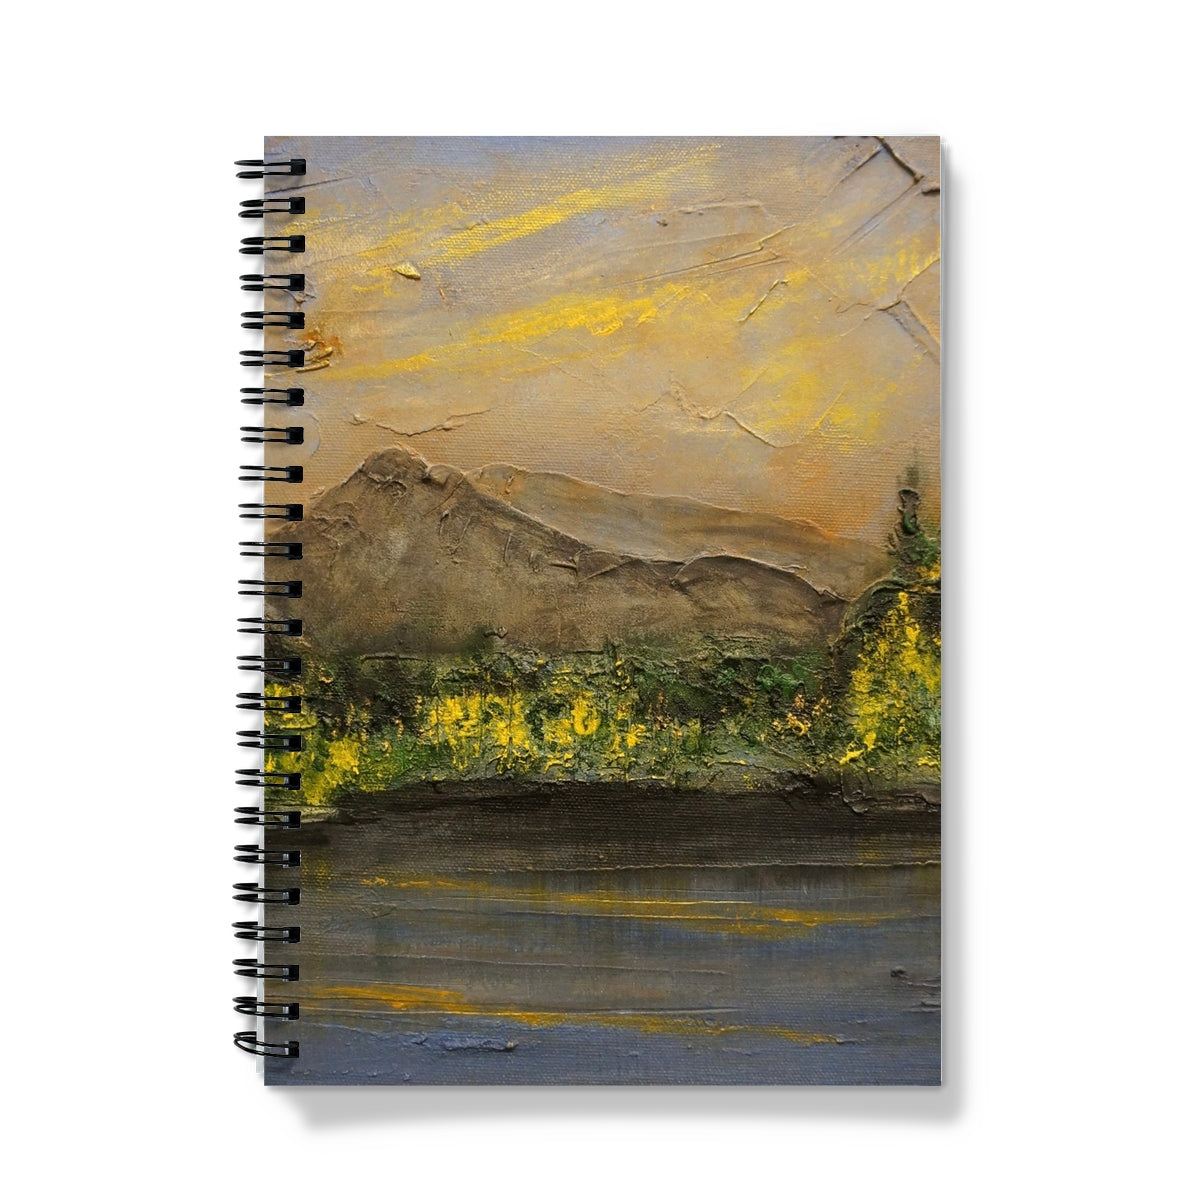 Glencoe Lochan Dusk Art Gifts Notebook-Journals & Notebooks-Scottish Lochs & Mountains Art Gallery-A5-Lined-Paintings, Prints, Homeware, Art Gifts From Scotland By Scottish Artist Kevin Hunter